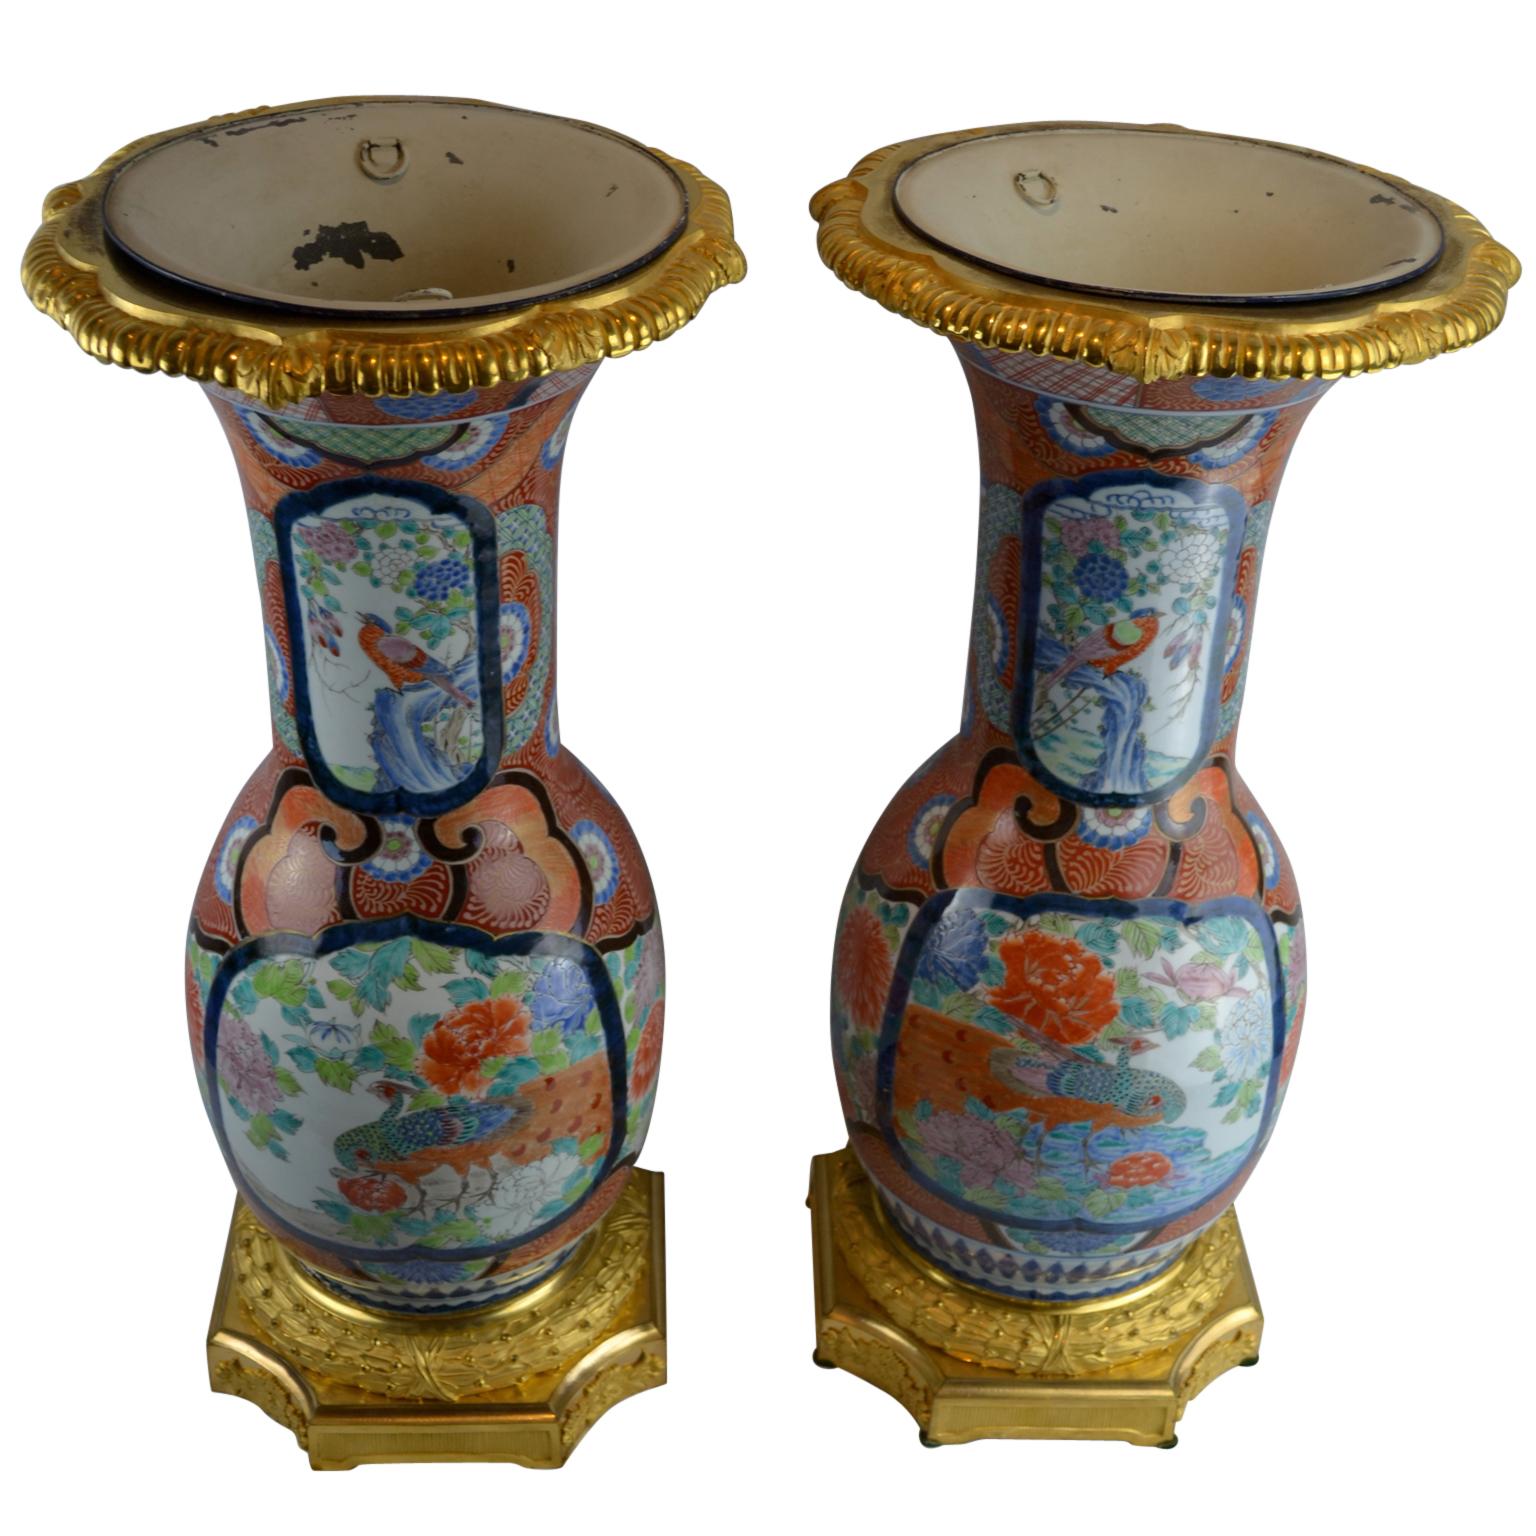 An impressive pair of late 19th century Japanese Imari porcelain vases decorated with colourful peacocks, other birds, flowers, chrysanthemums, manufactured for export to France where the finely chased gilt bronze bases and rims were added. The